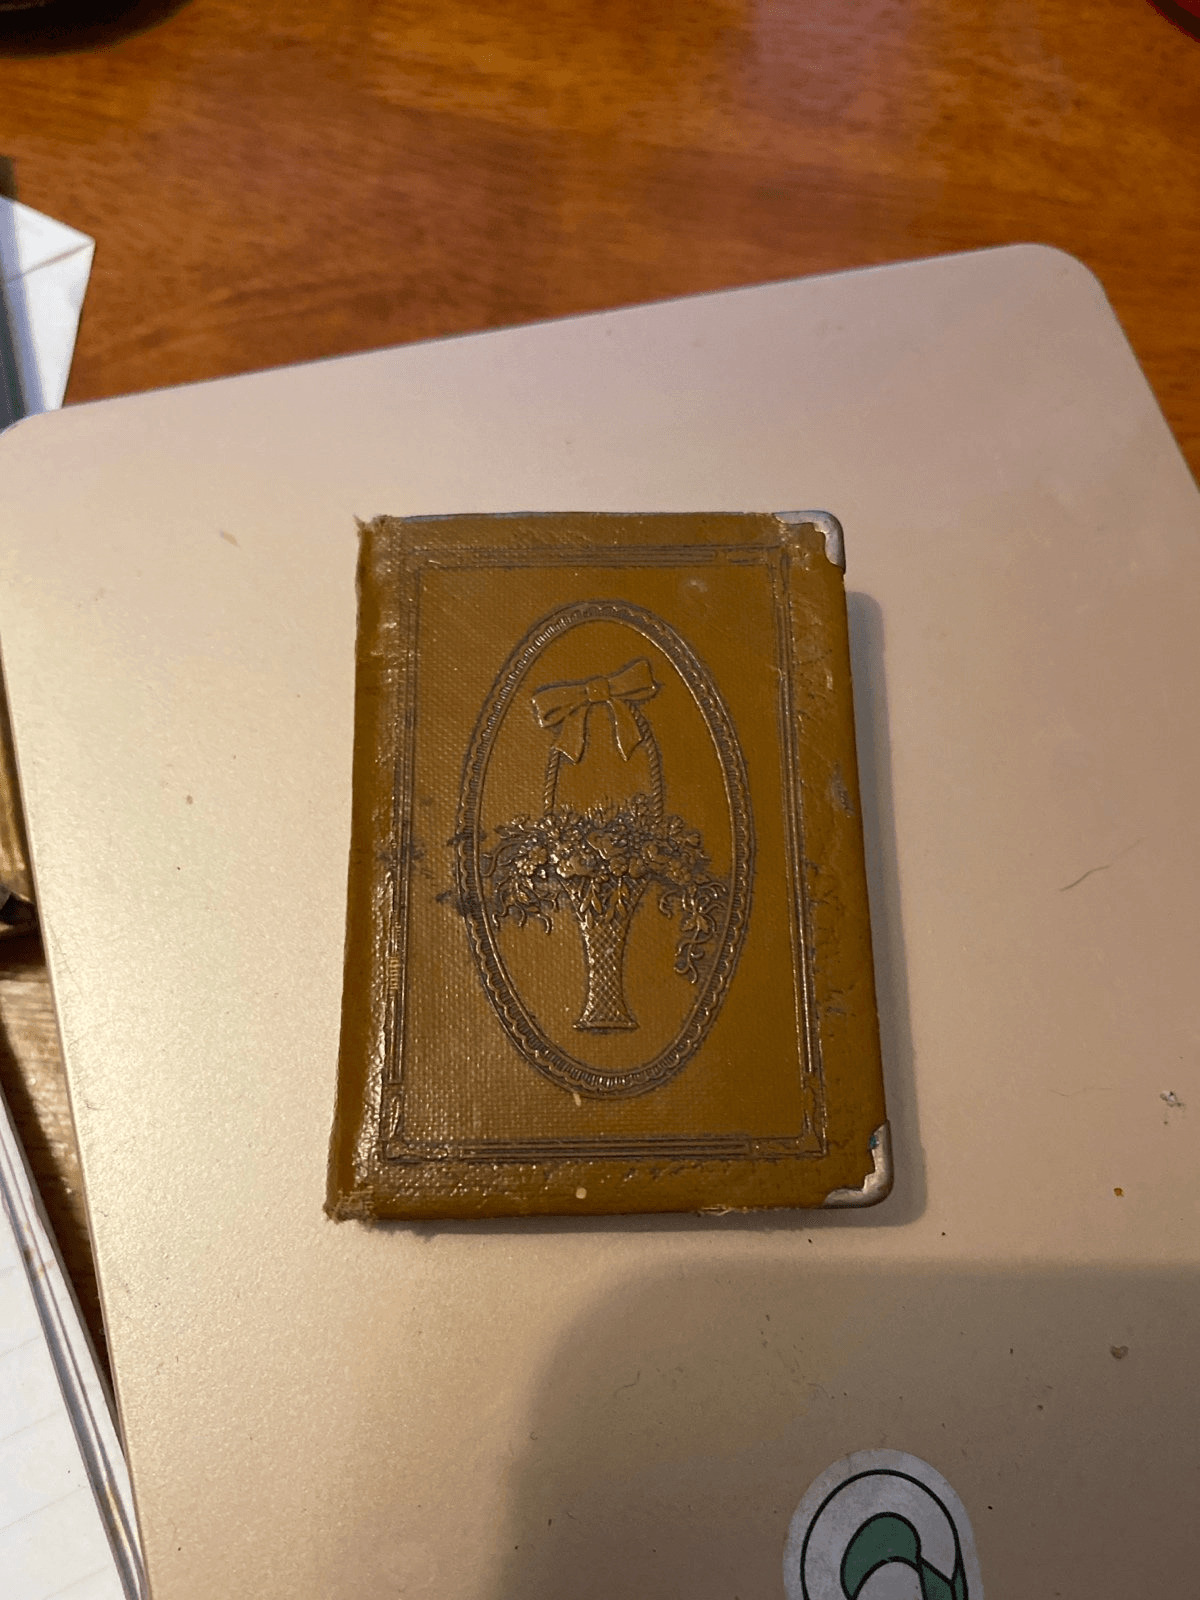 Vintage leather compact mirror